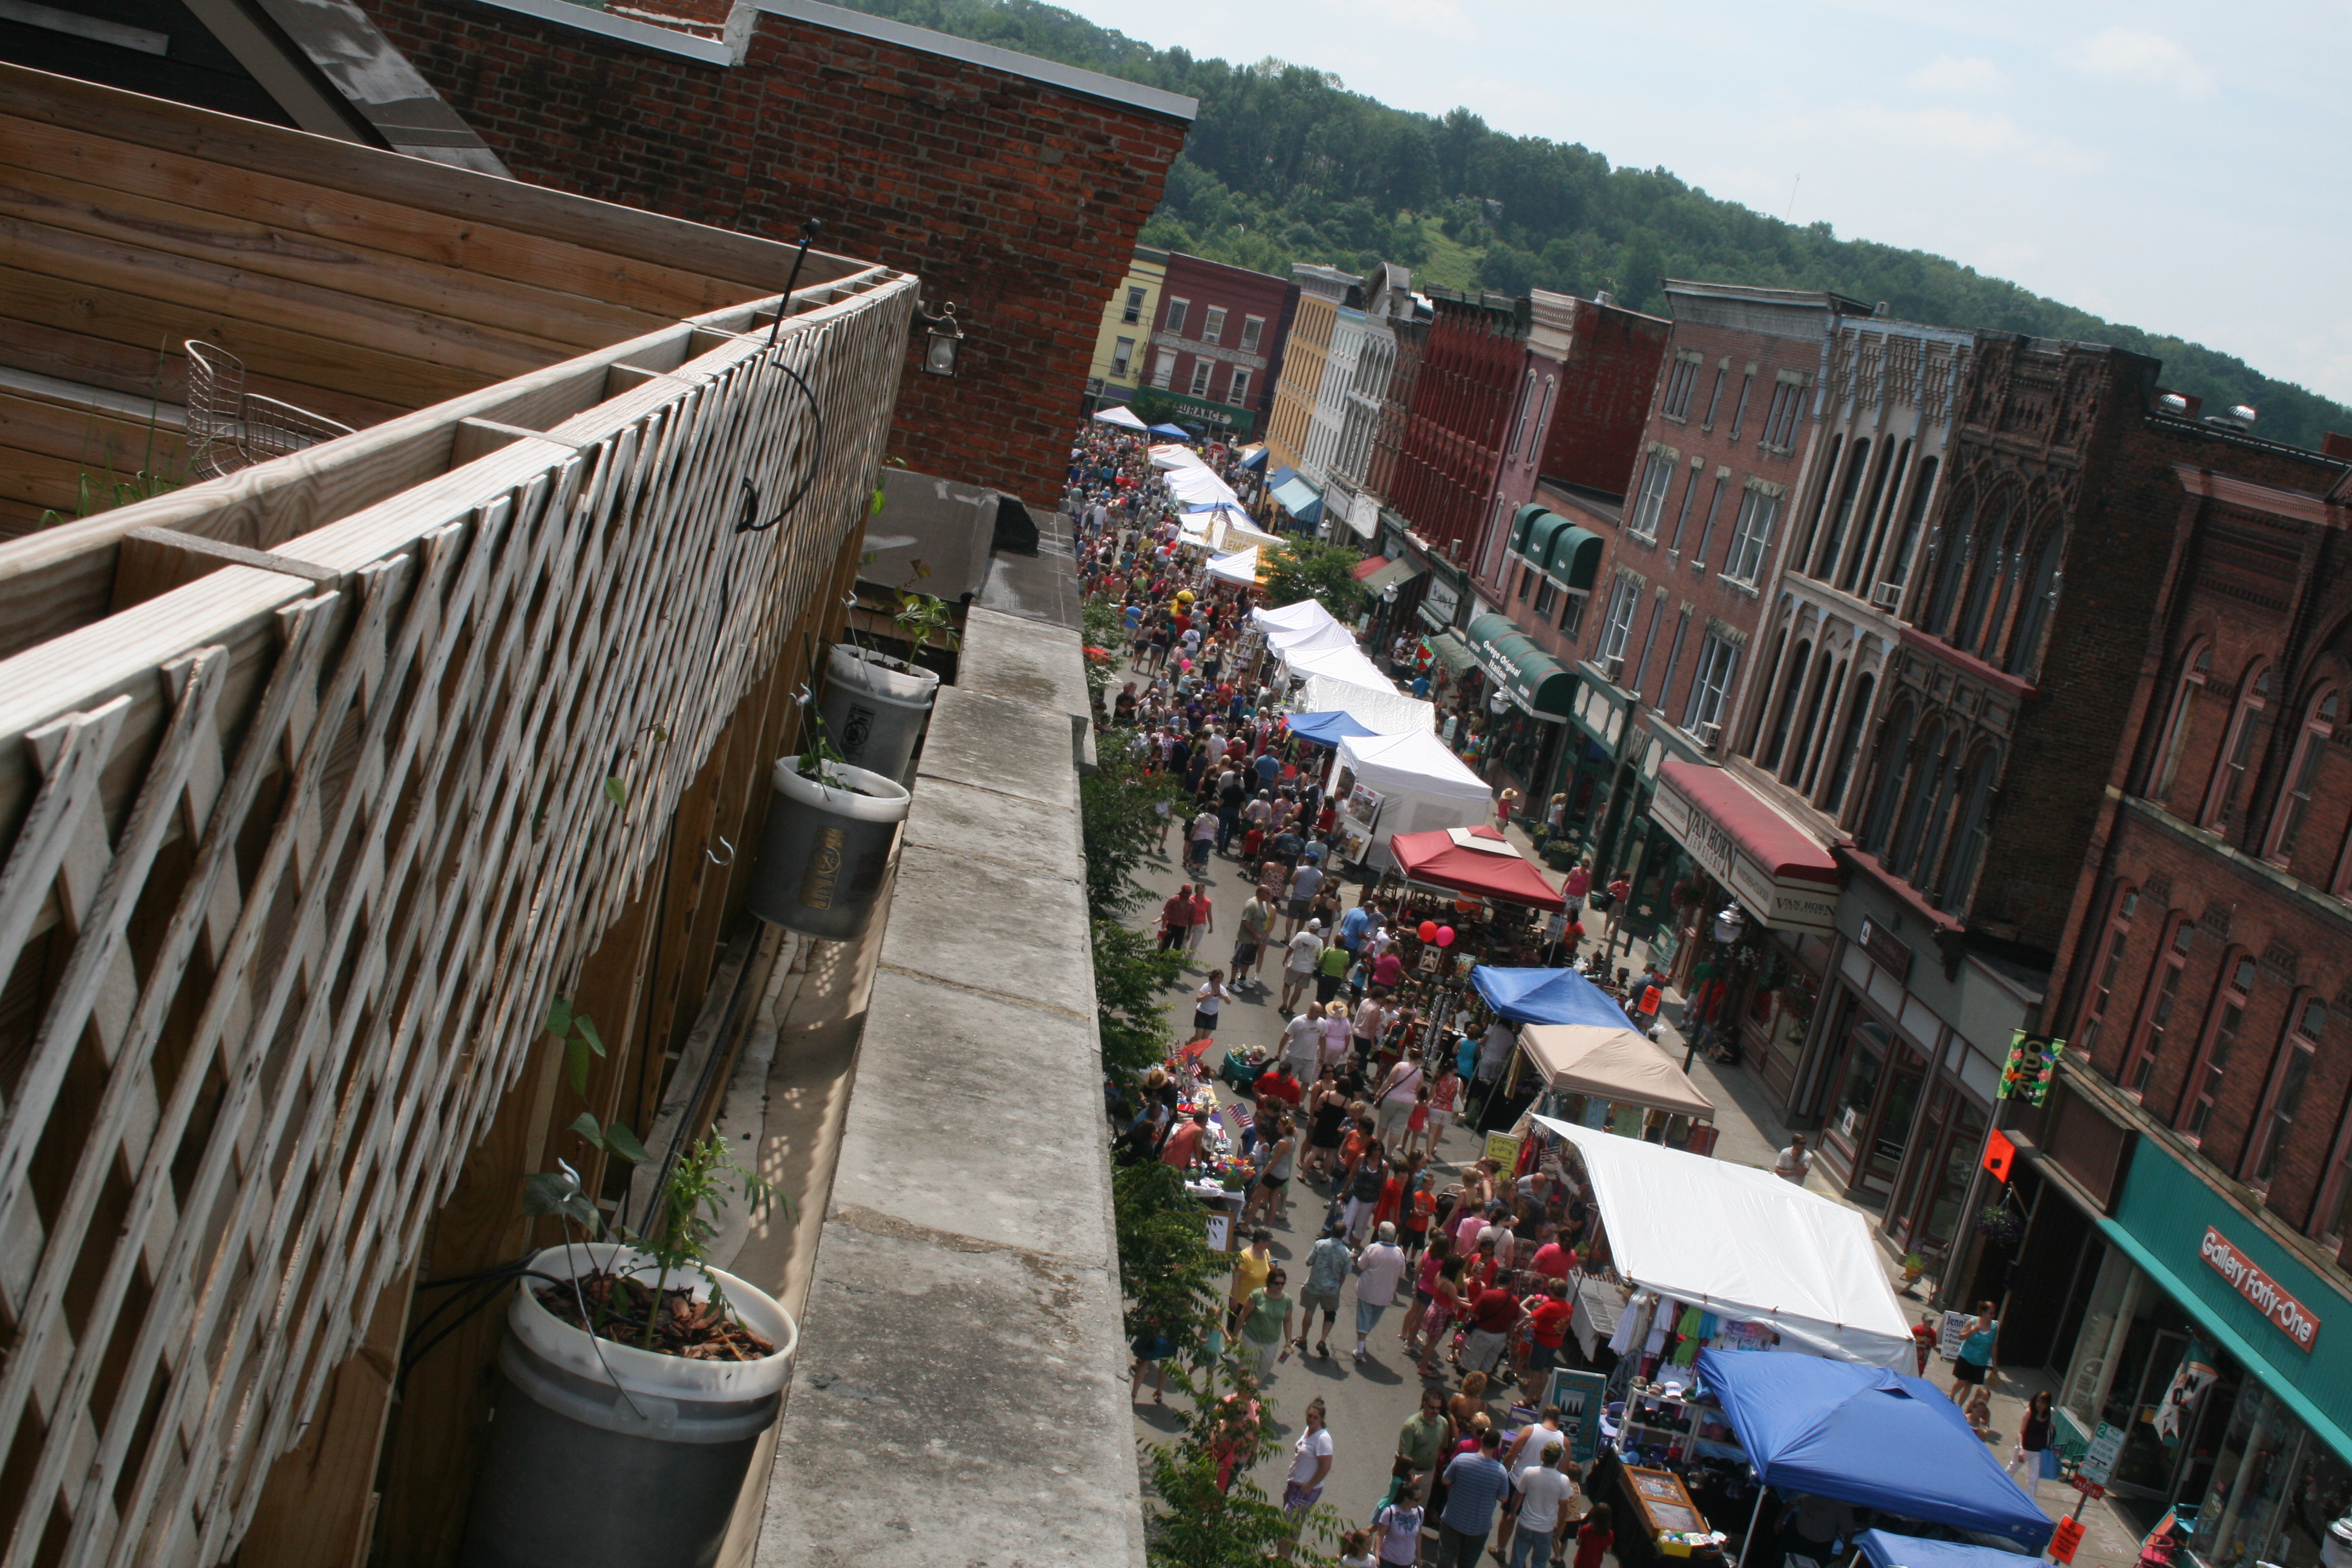 Memorable summertime fun at the Owego Strawberry Festival June 17 and 18  